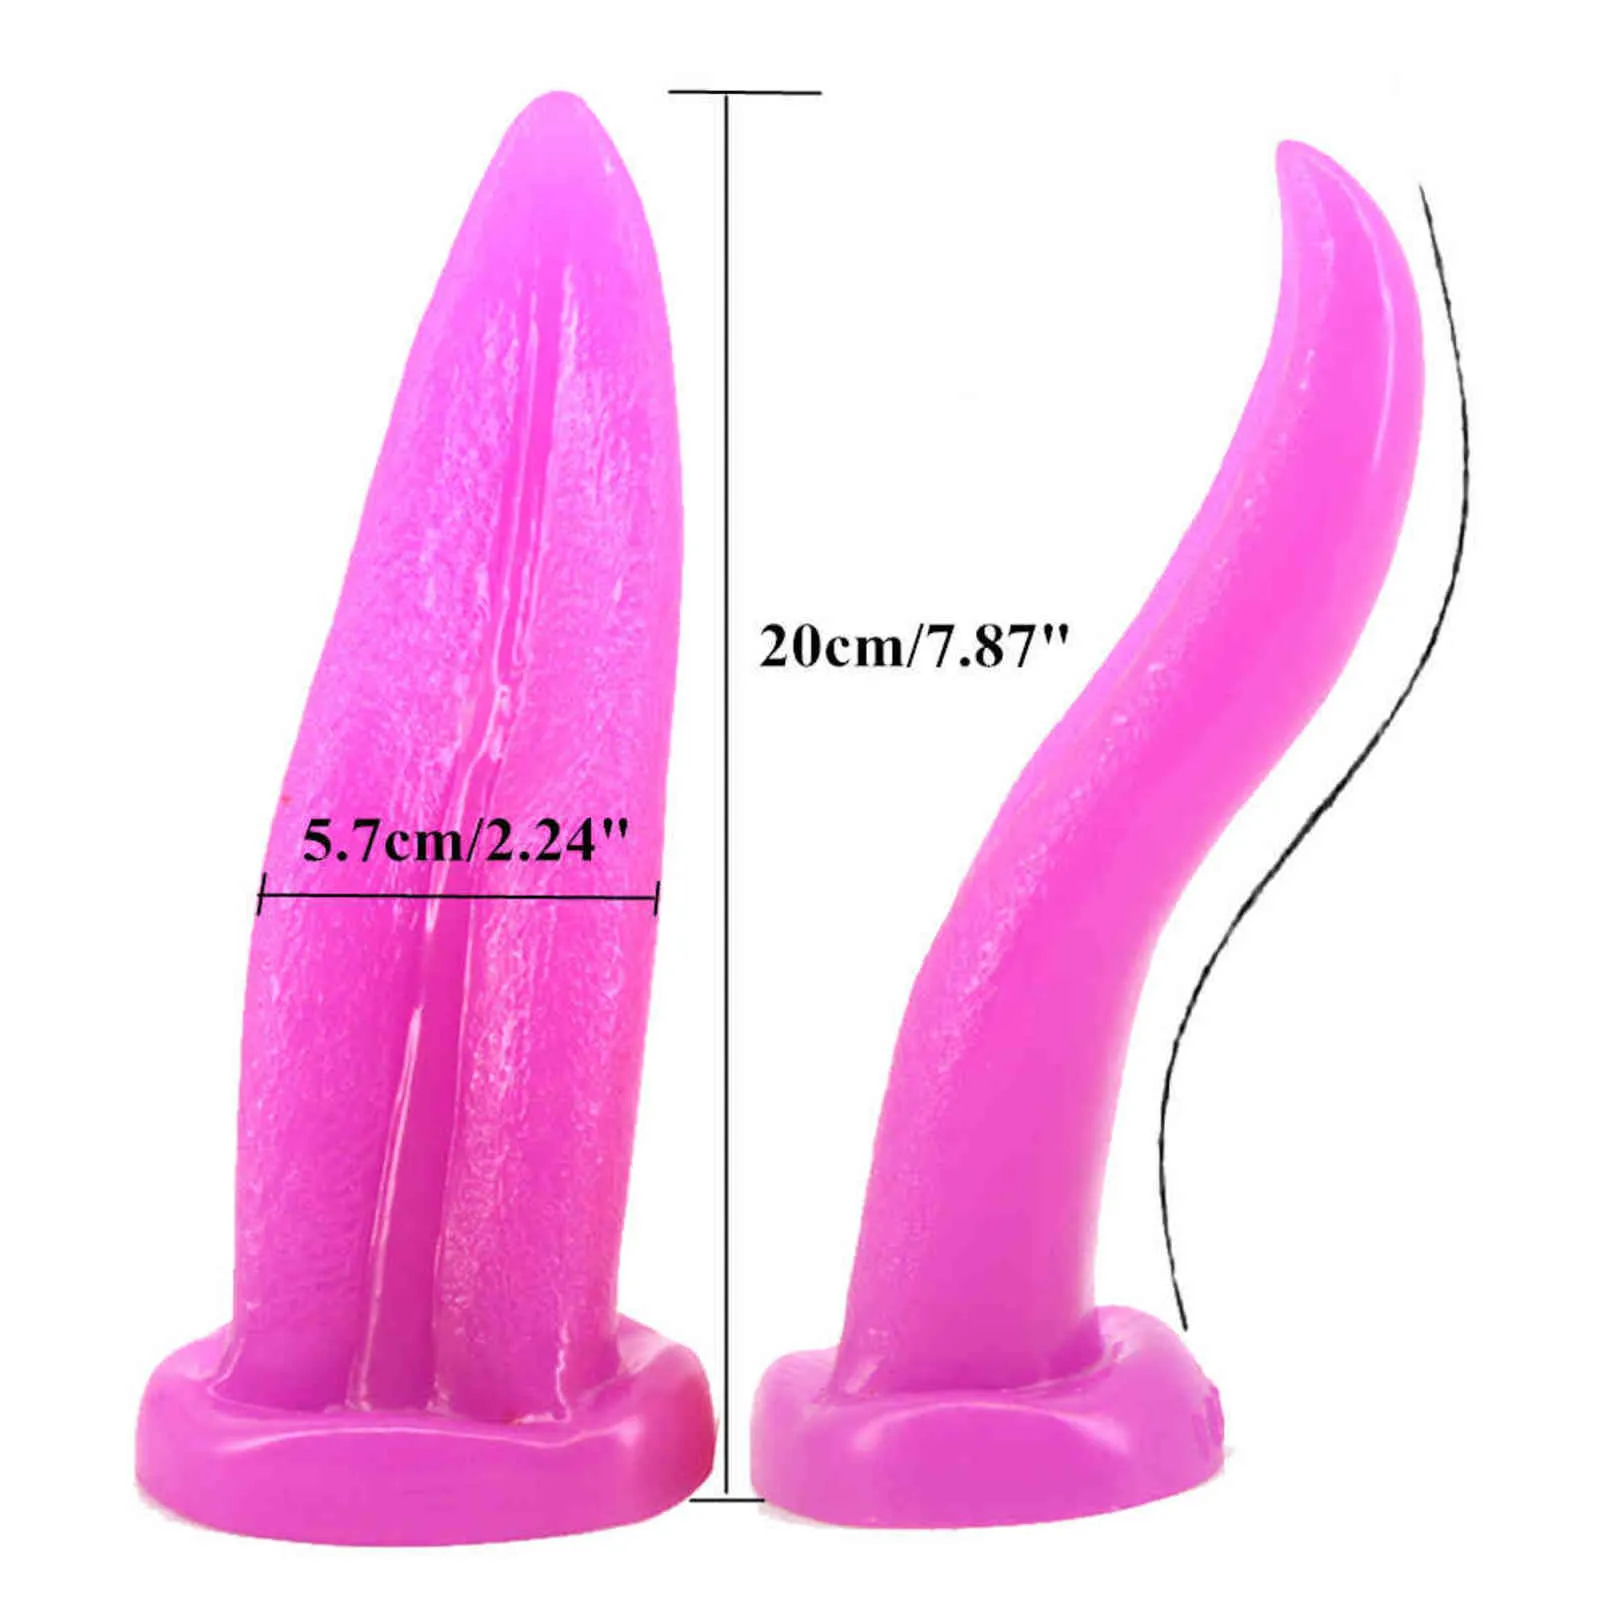 NXY Anal sex toys Realistic Tongue Anal Plug Sucker Buttplug G-Spot Vagina Massager Sexual Oral Sex Toys for Women Gay Adult Games Erotic Products 1123